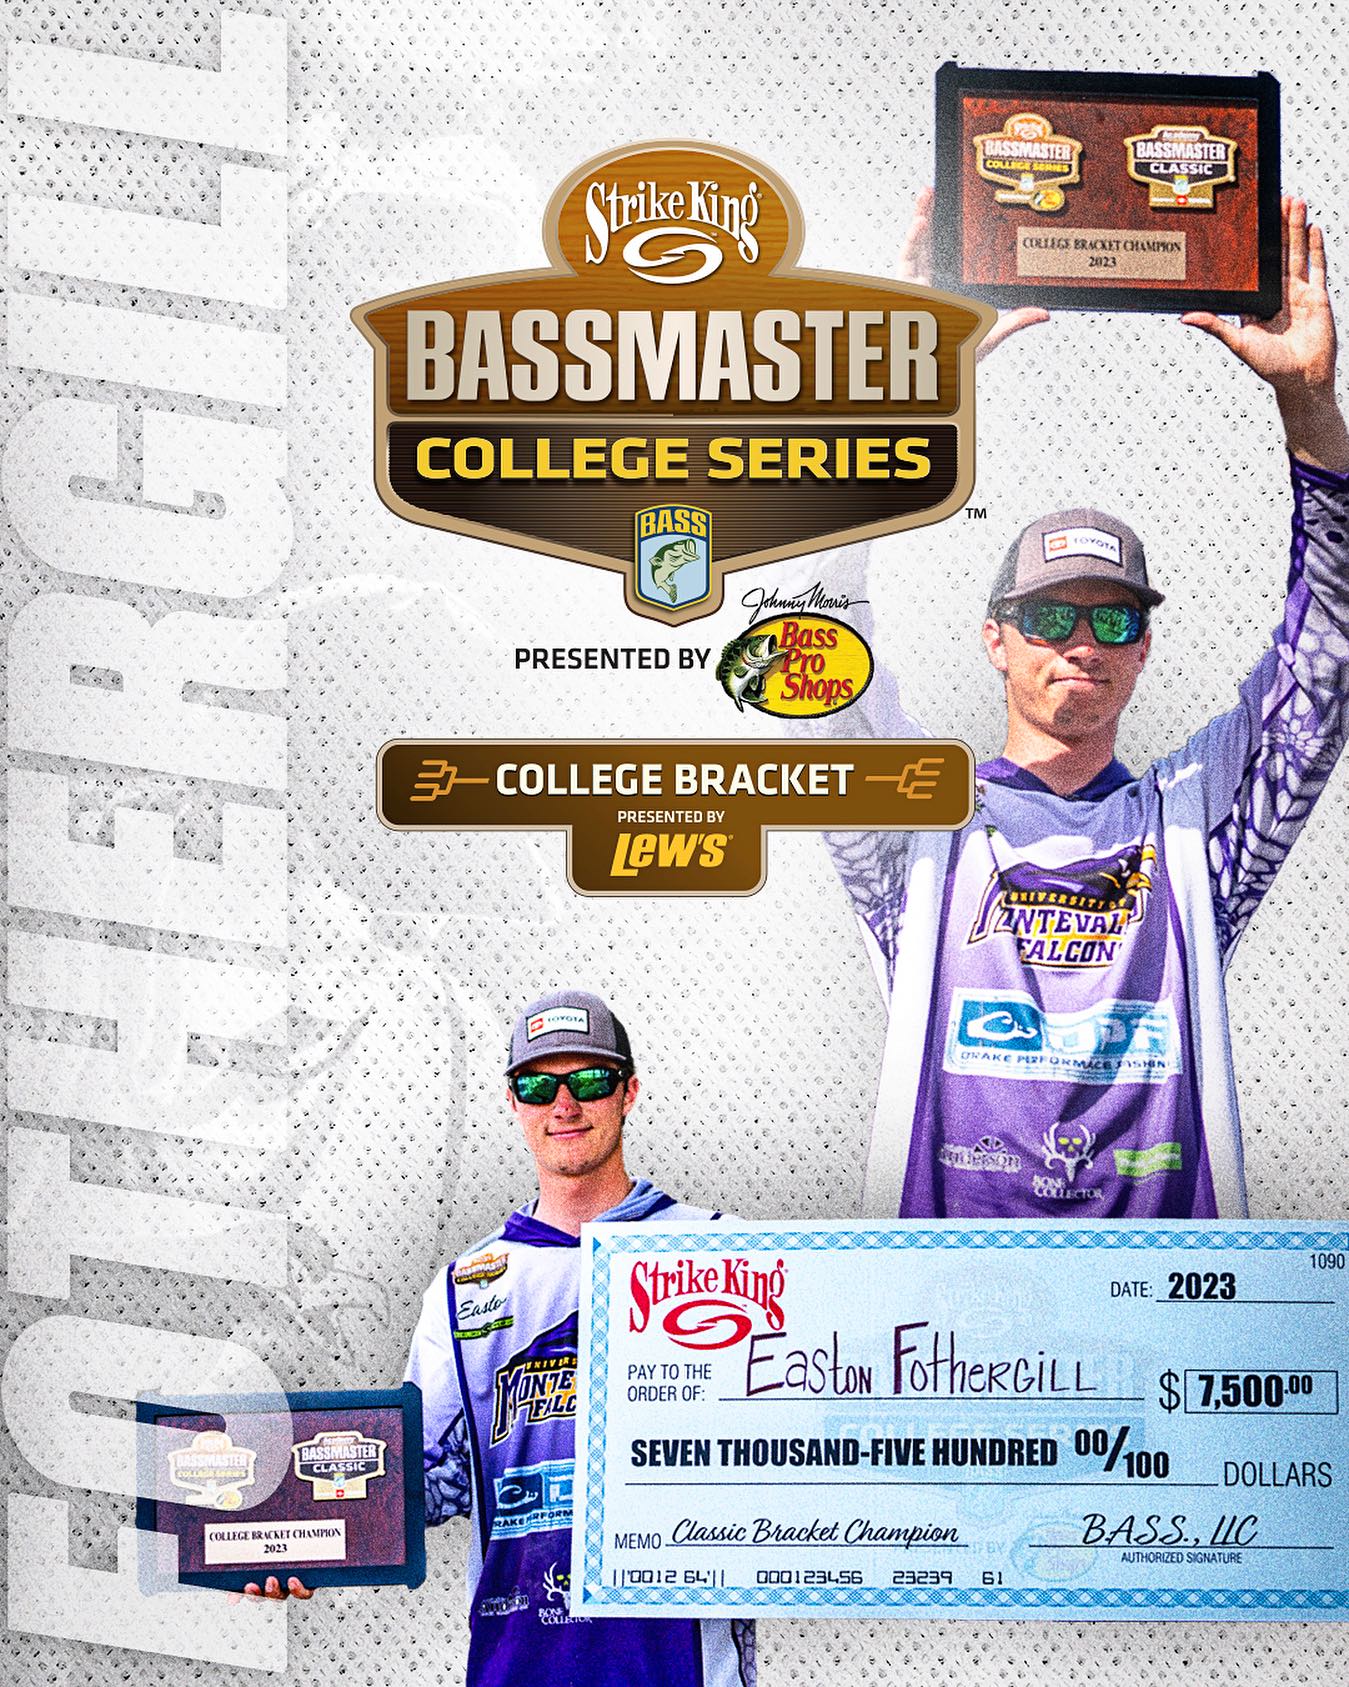 Bassmaster College Classic Bracket presented by Lew's - Results - Bassmaster